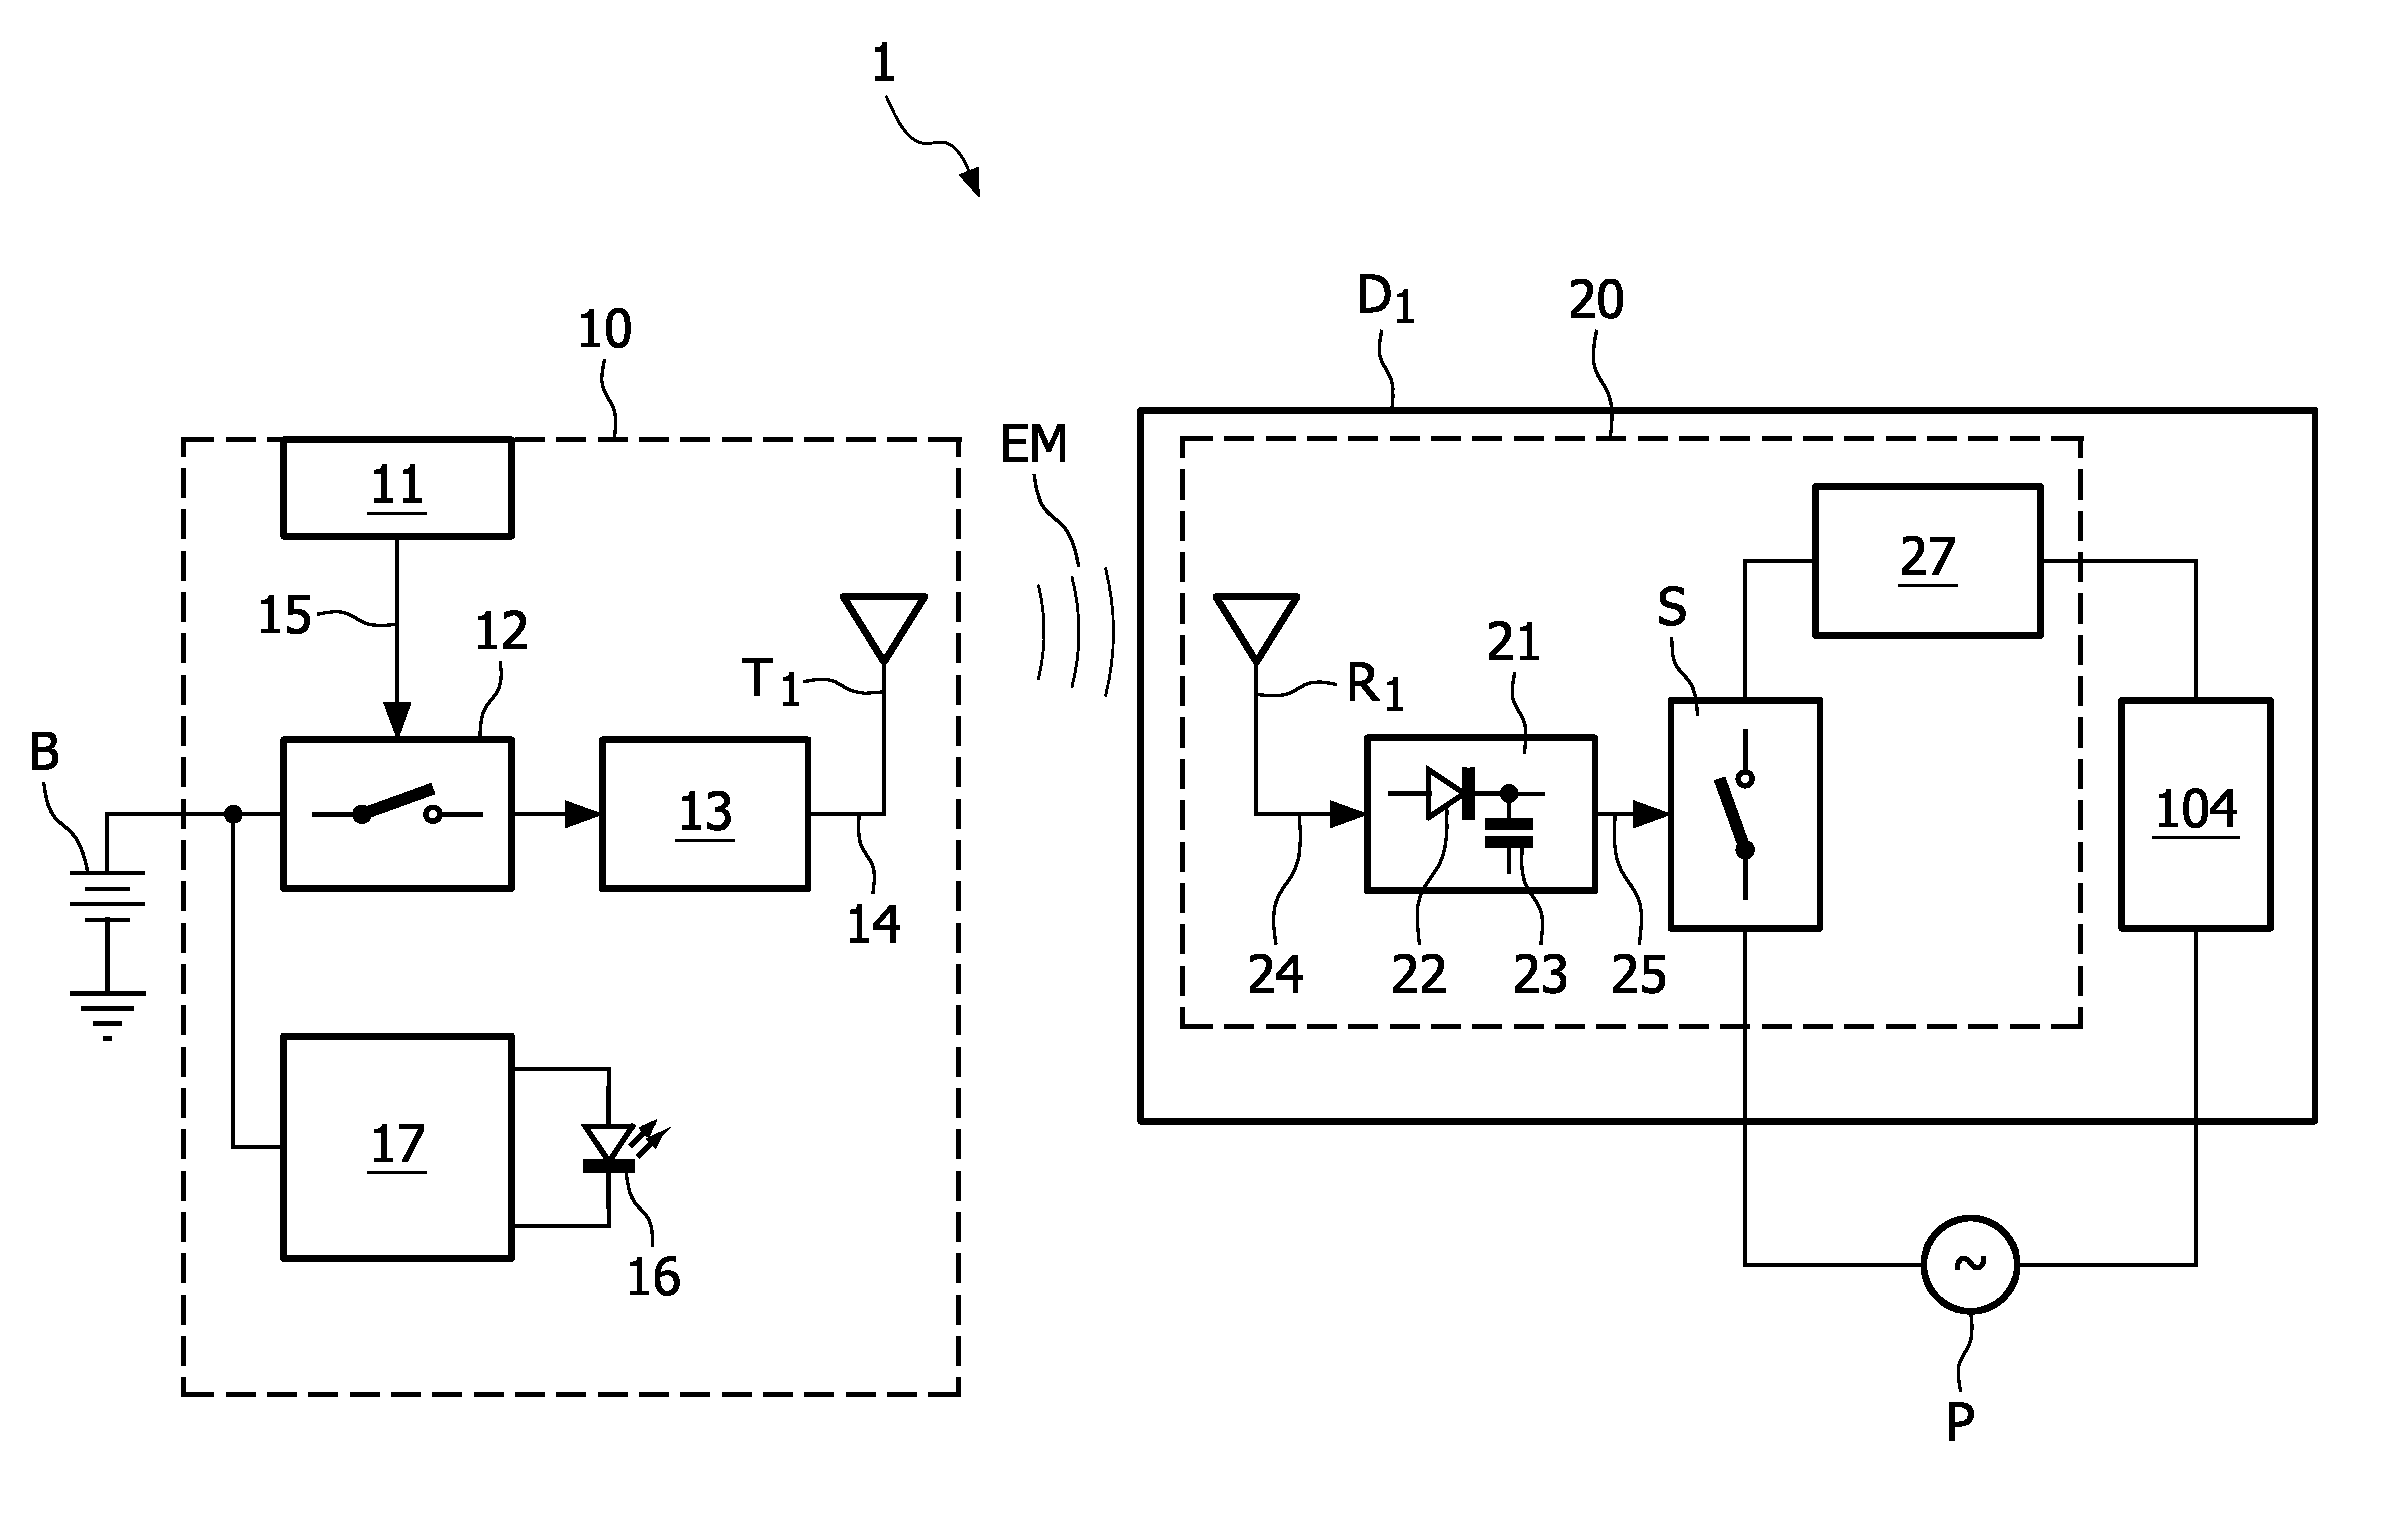 Method of actuating a switch between a device and a power supply